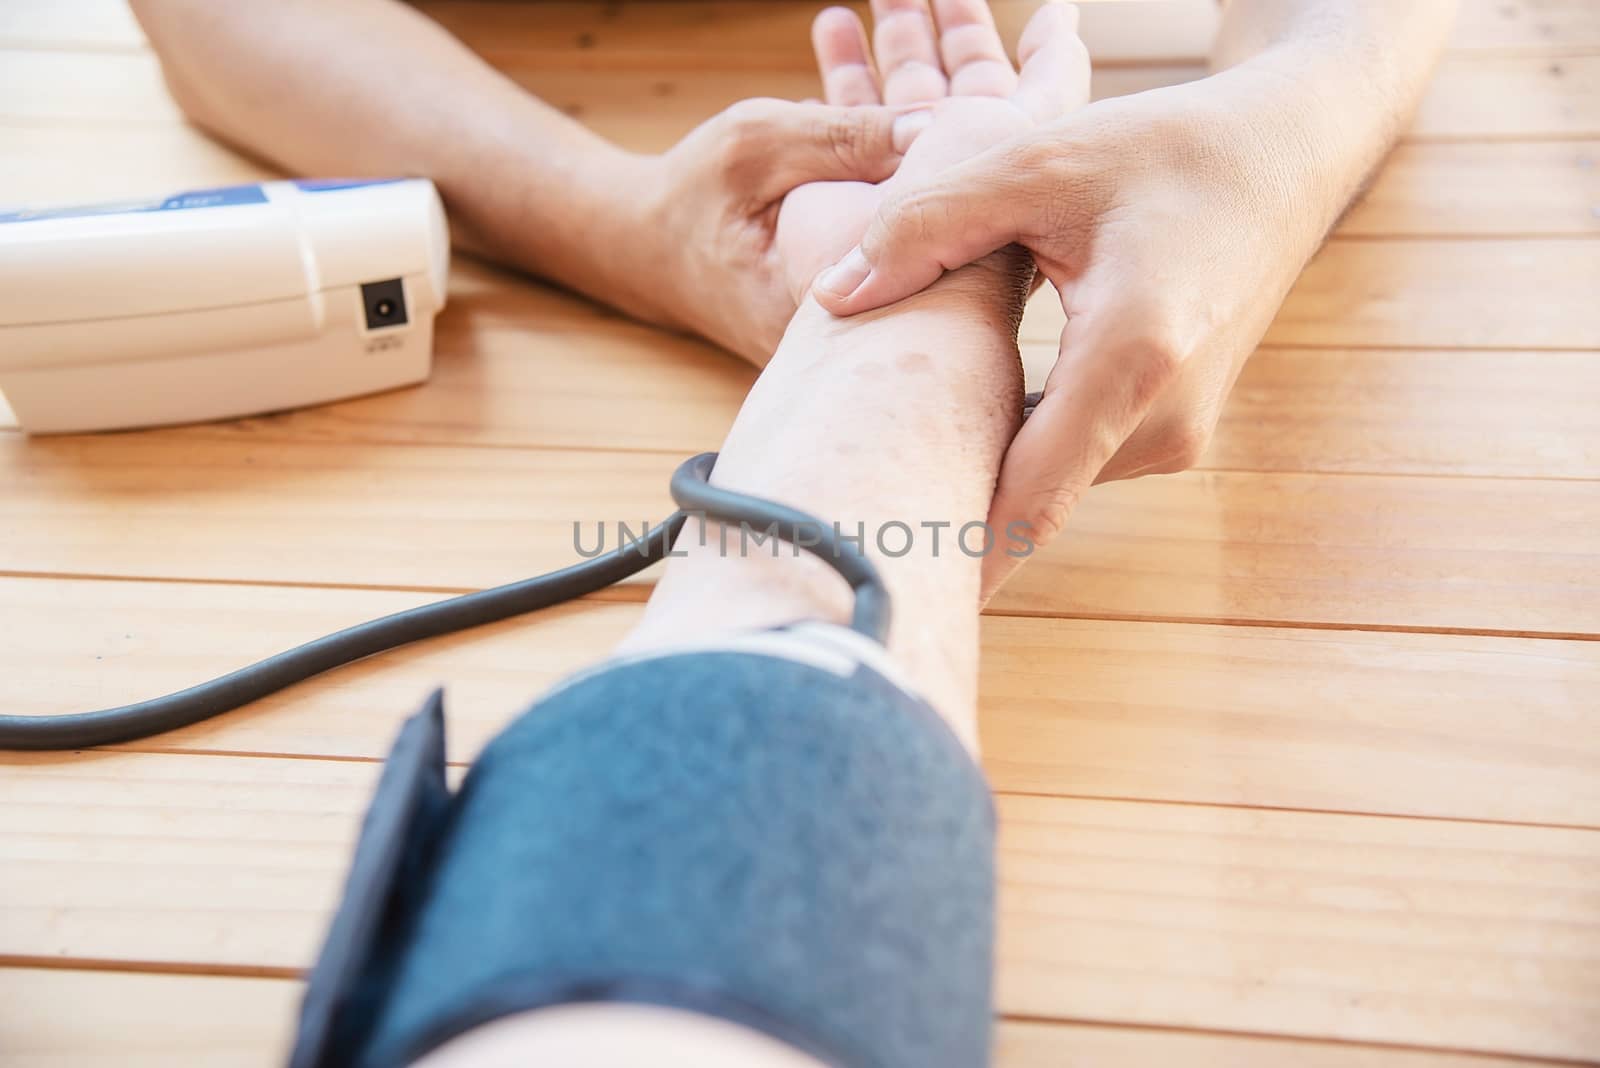 Old lady is being checked blood pressure using blood pressure monitor kid set by pairhandmade